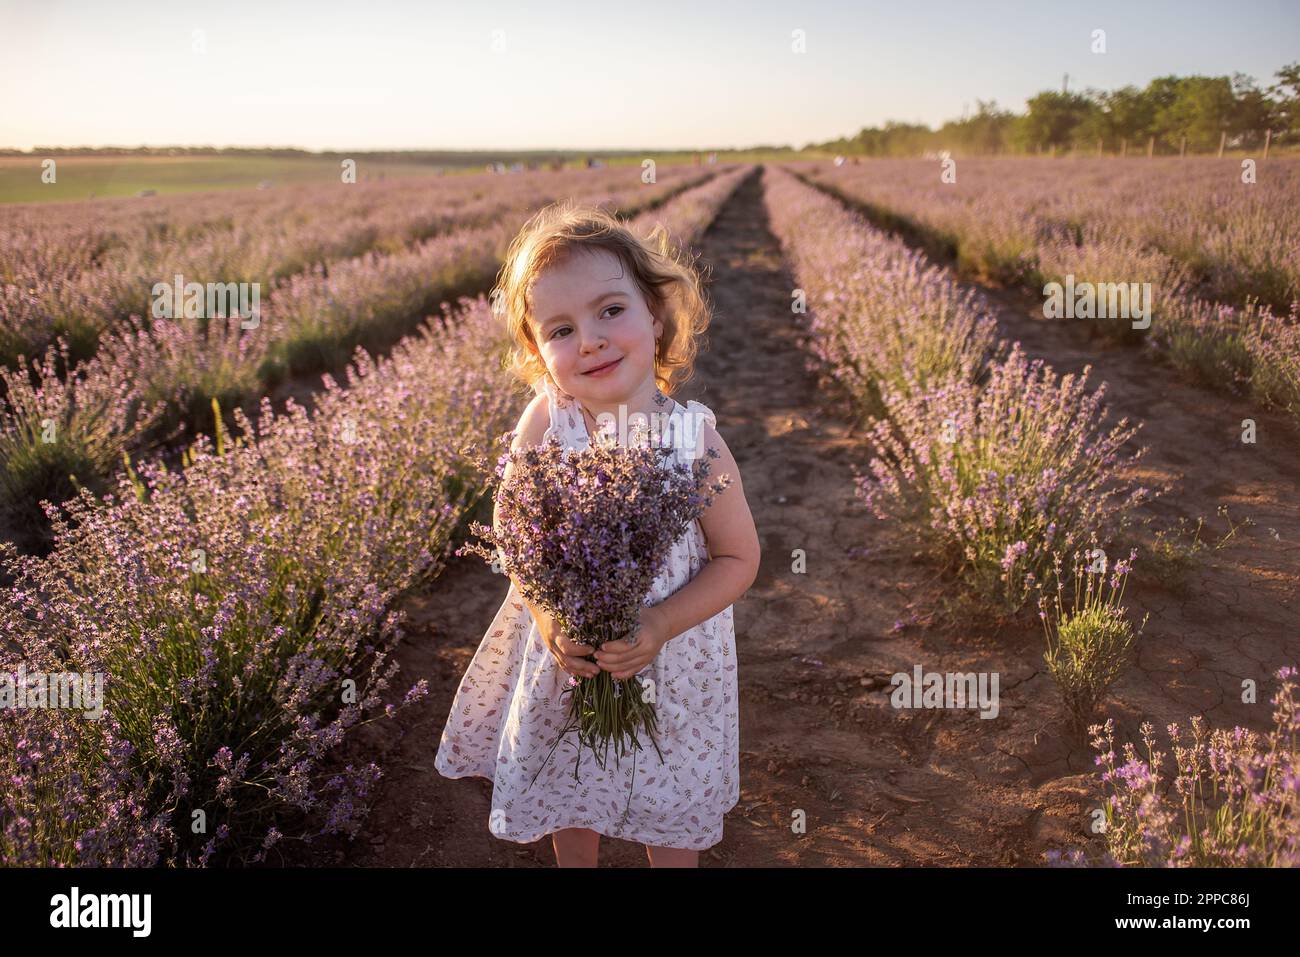 Close-up portrait of little girl in flower dress holding bouquet with purple lavender at sunset. Child stands among the rows in field. Walk in country Stock Photo